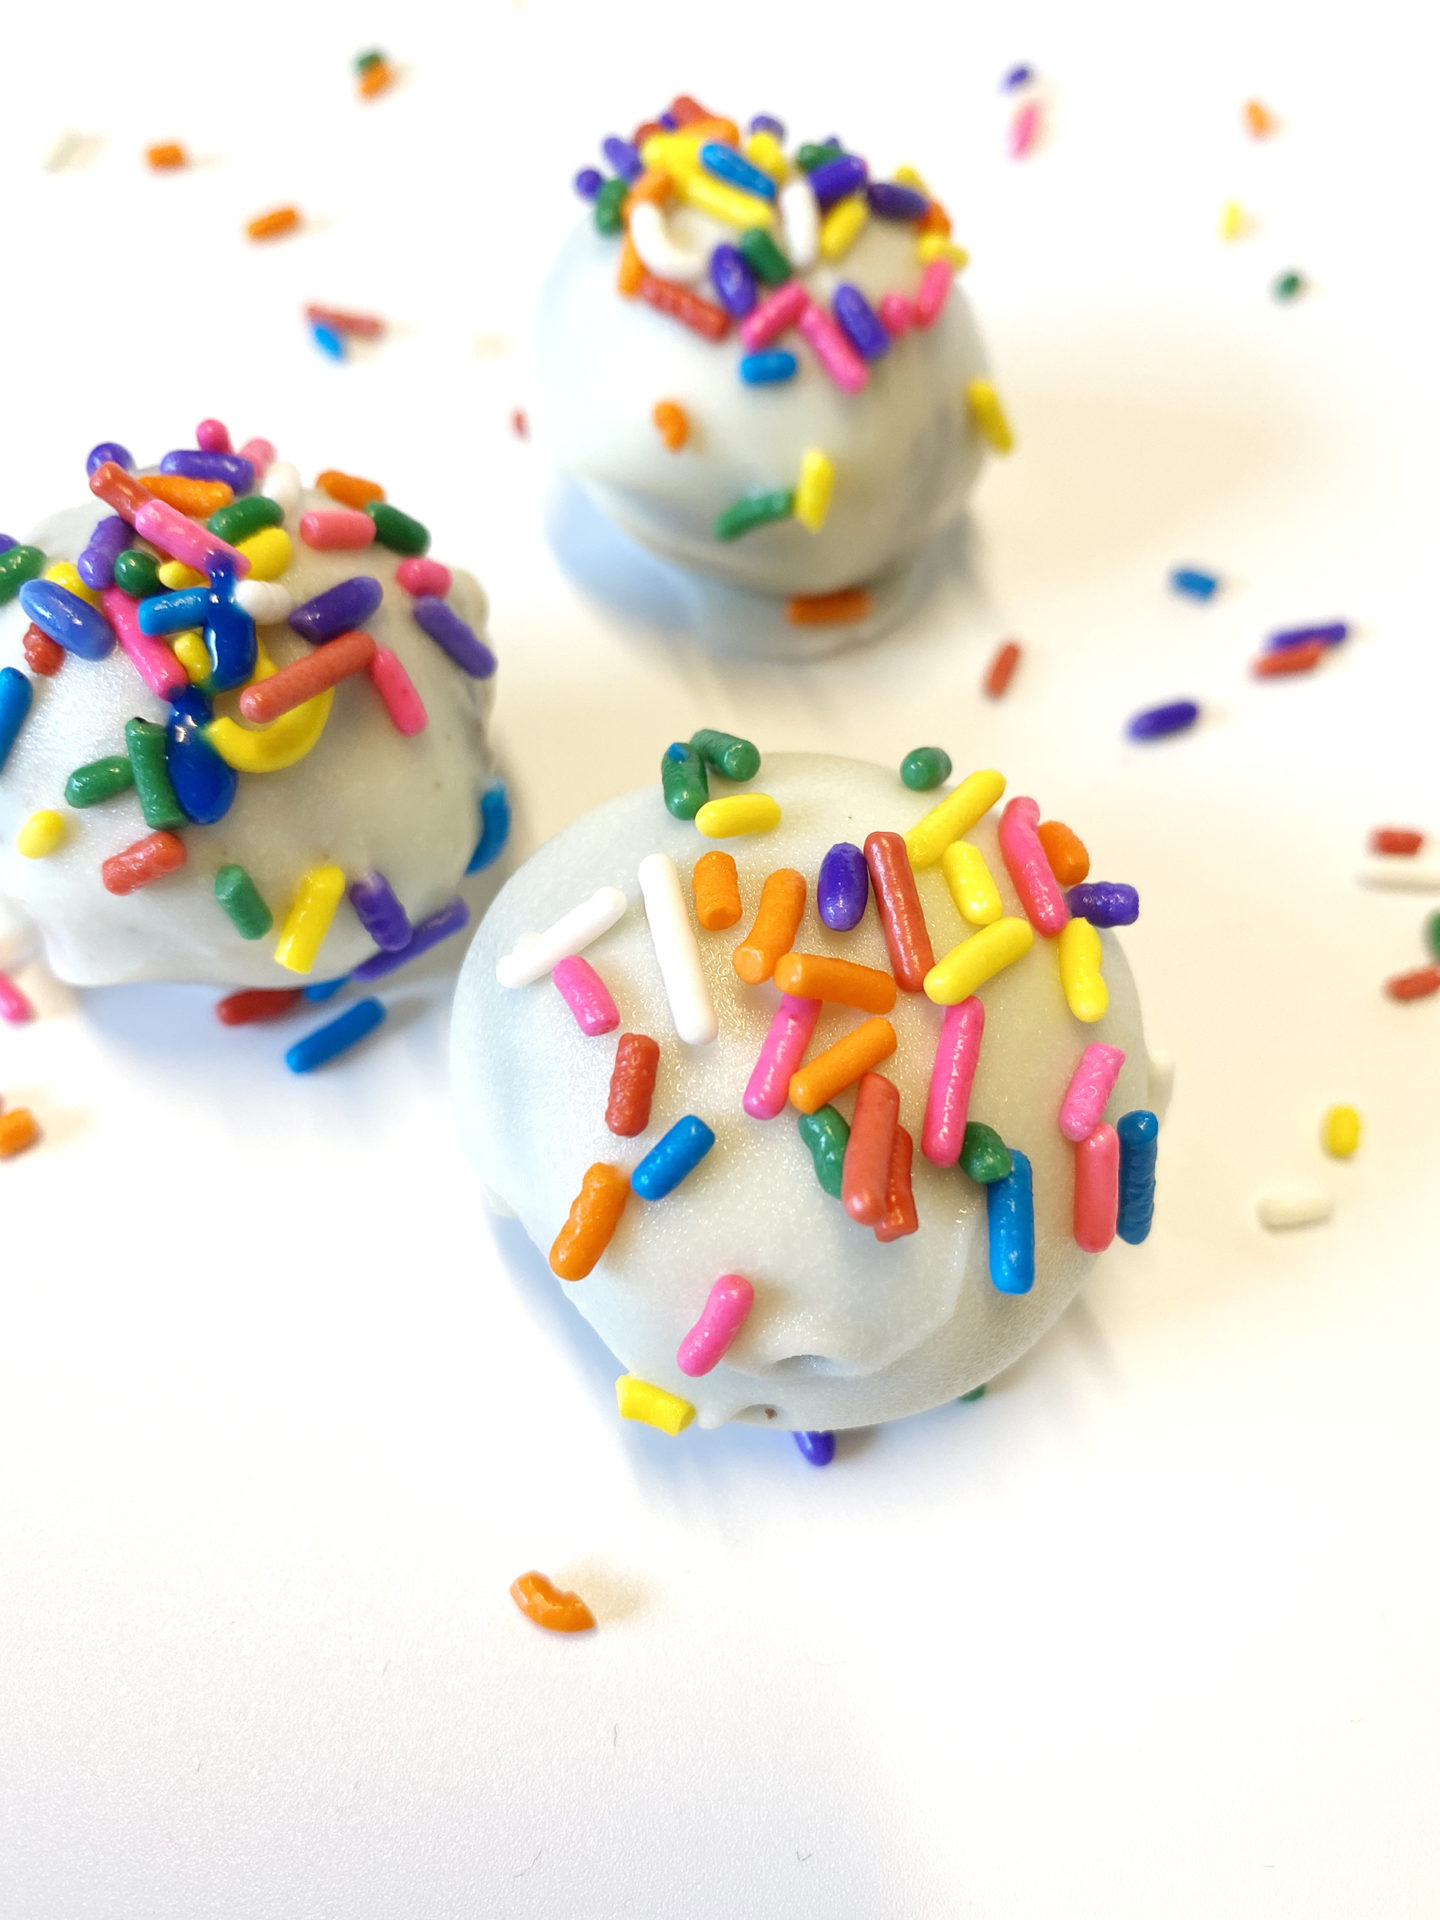  chocolate cake balls dipped in white chocolate and rainbow sprinkles 